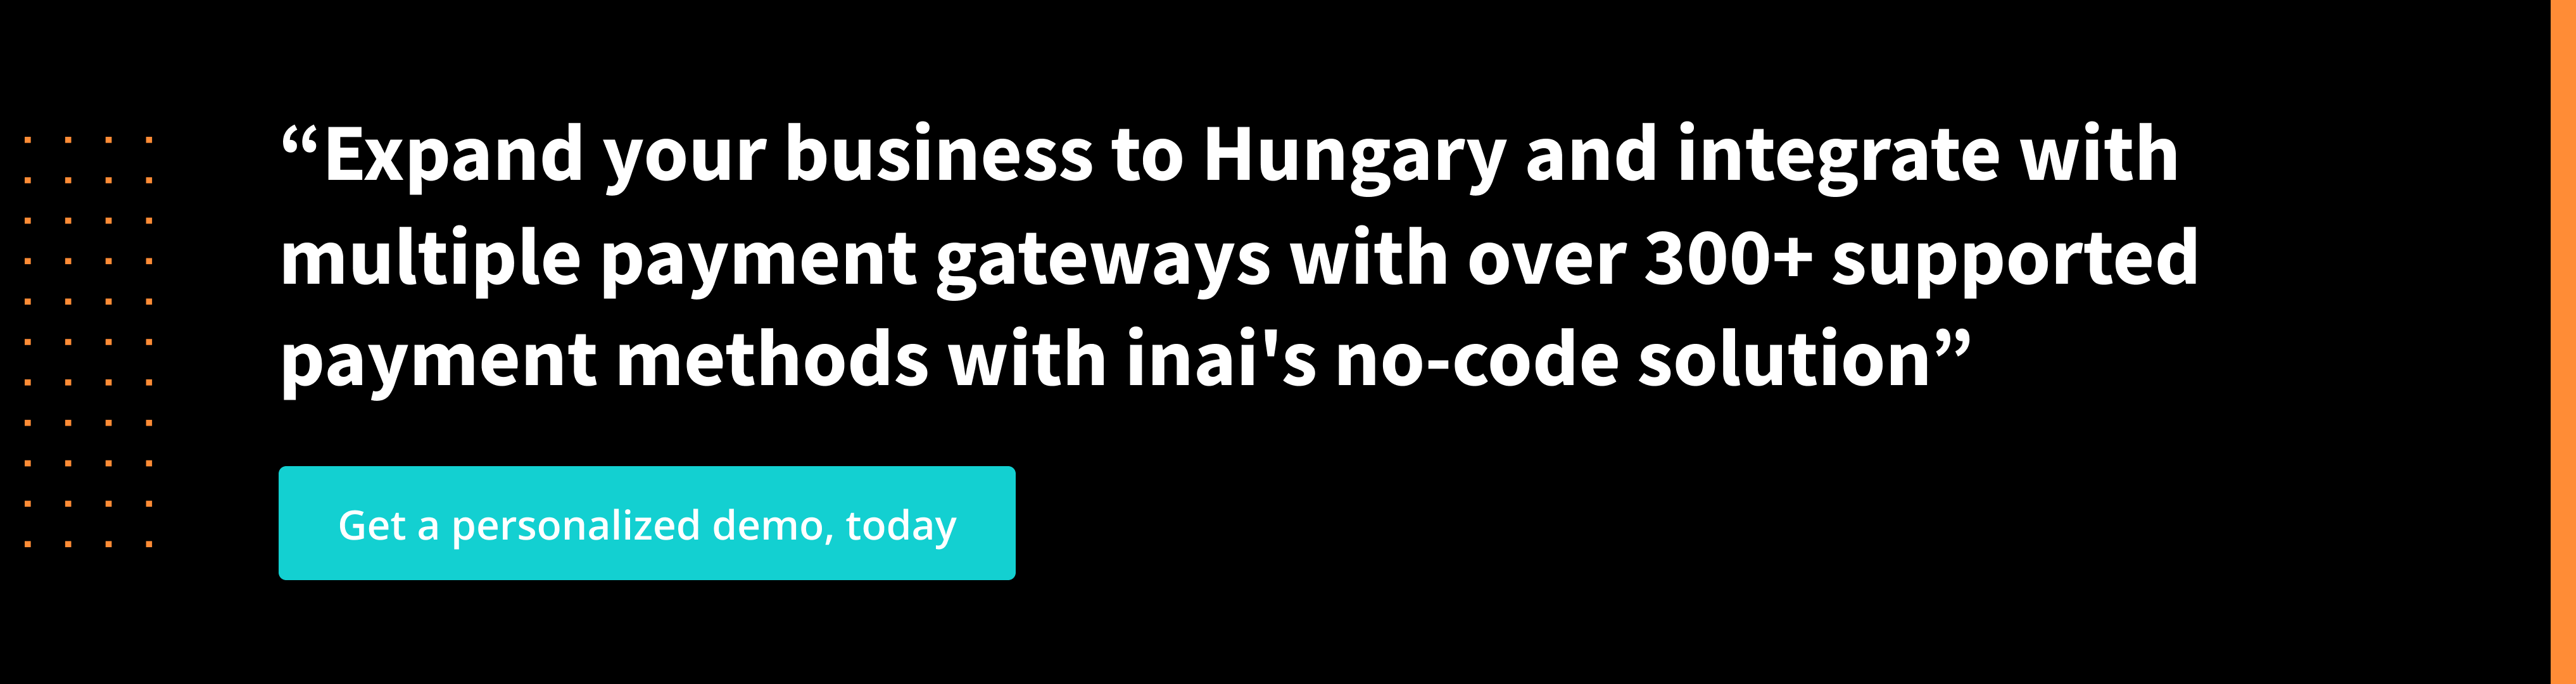 Expand globally with inai